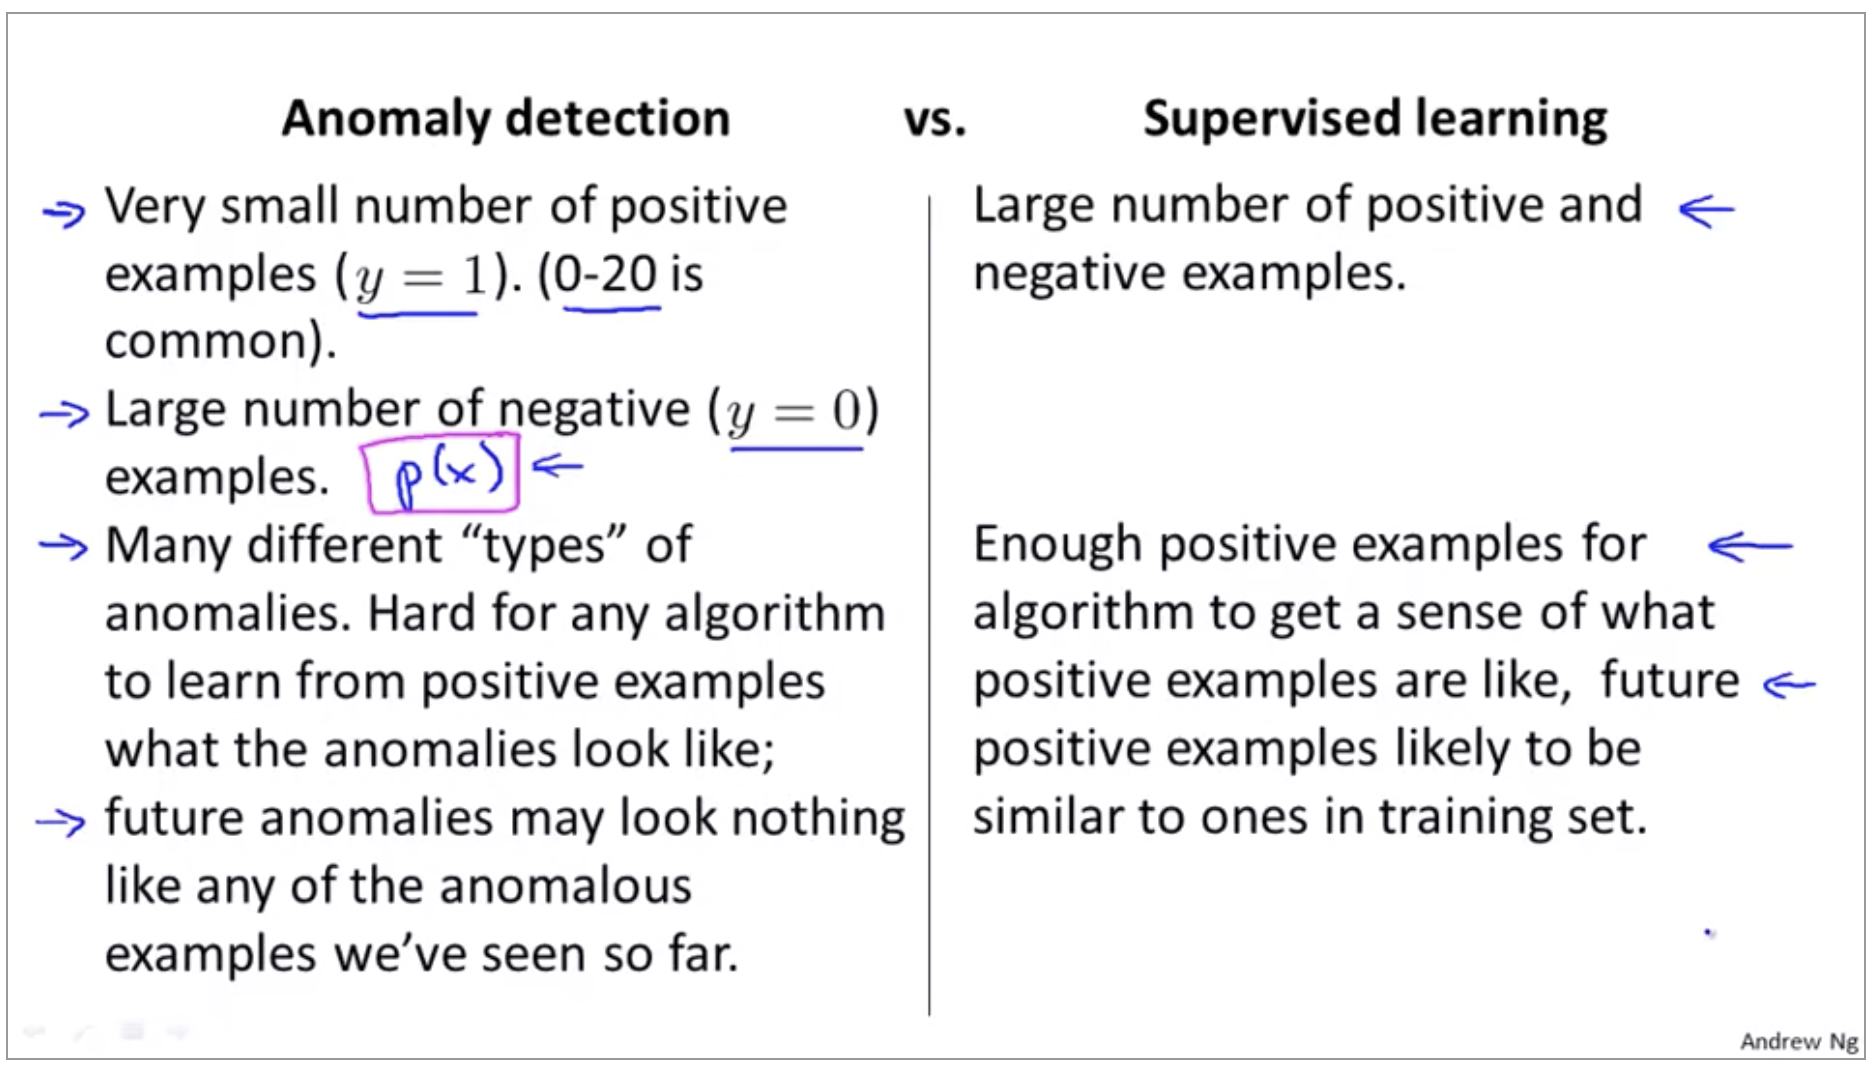 anomaly-detection-vs-supervised-learning.png